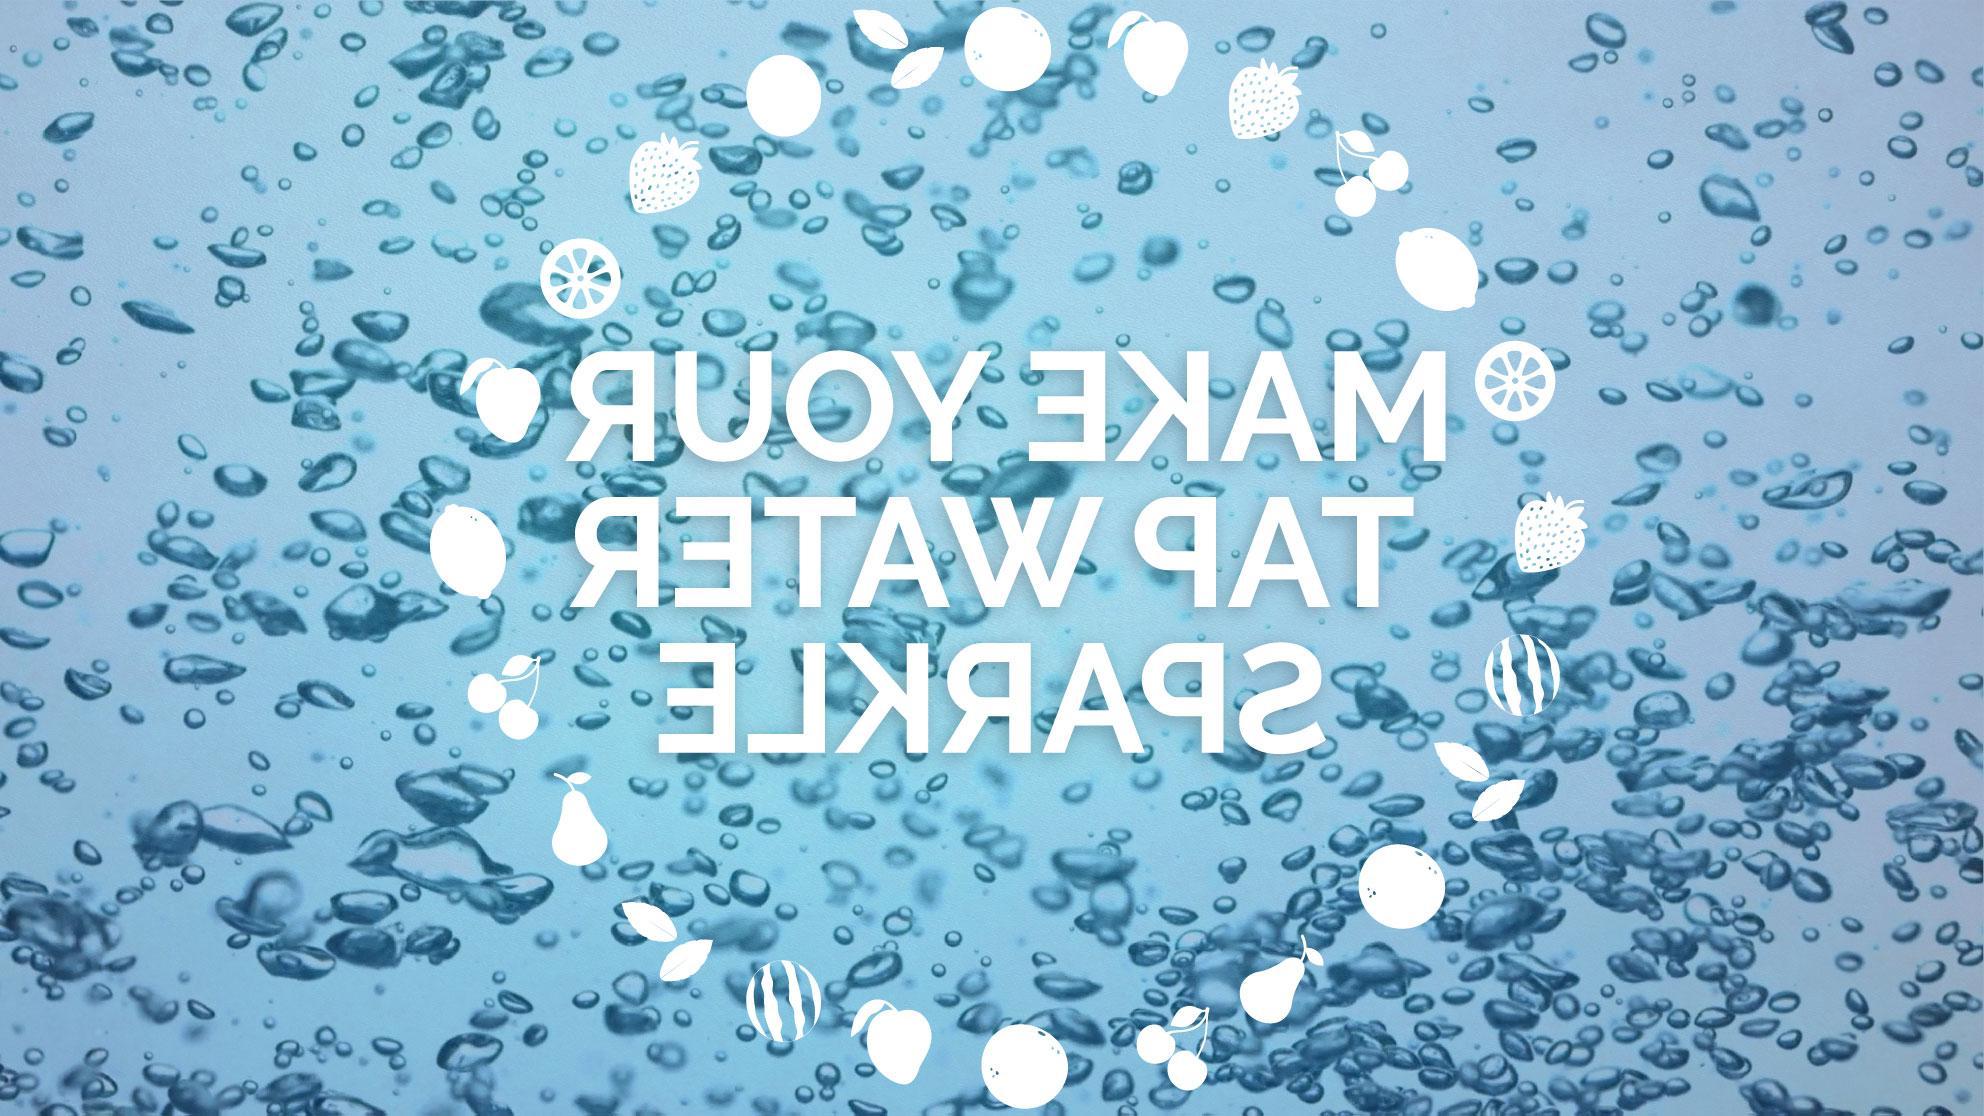 Make Your Tap Water Sparkle header image